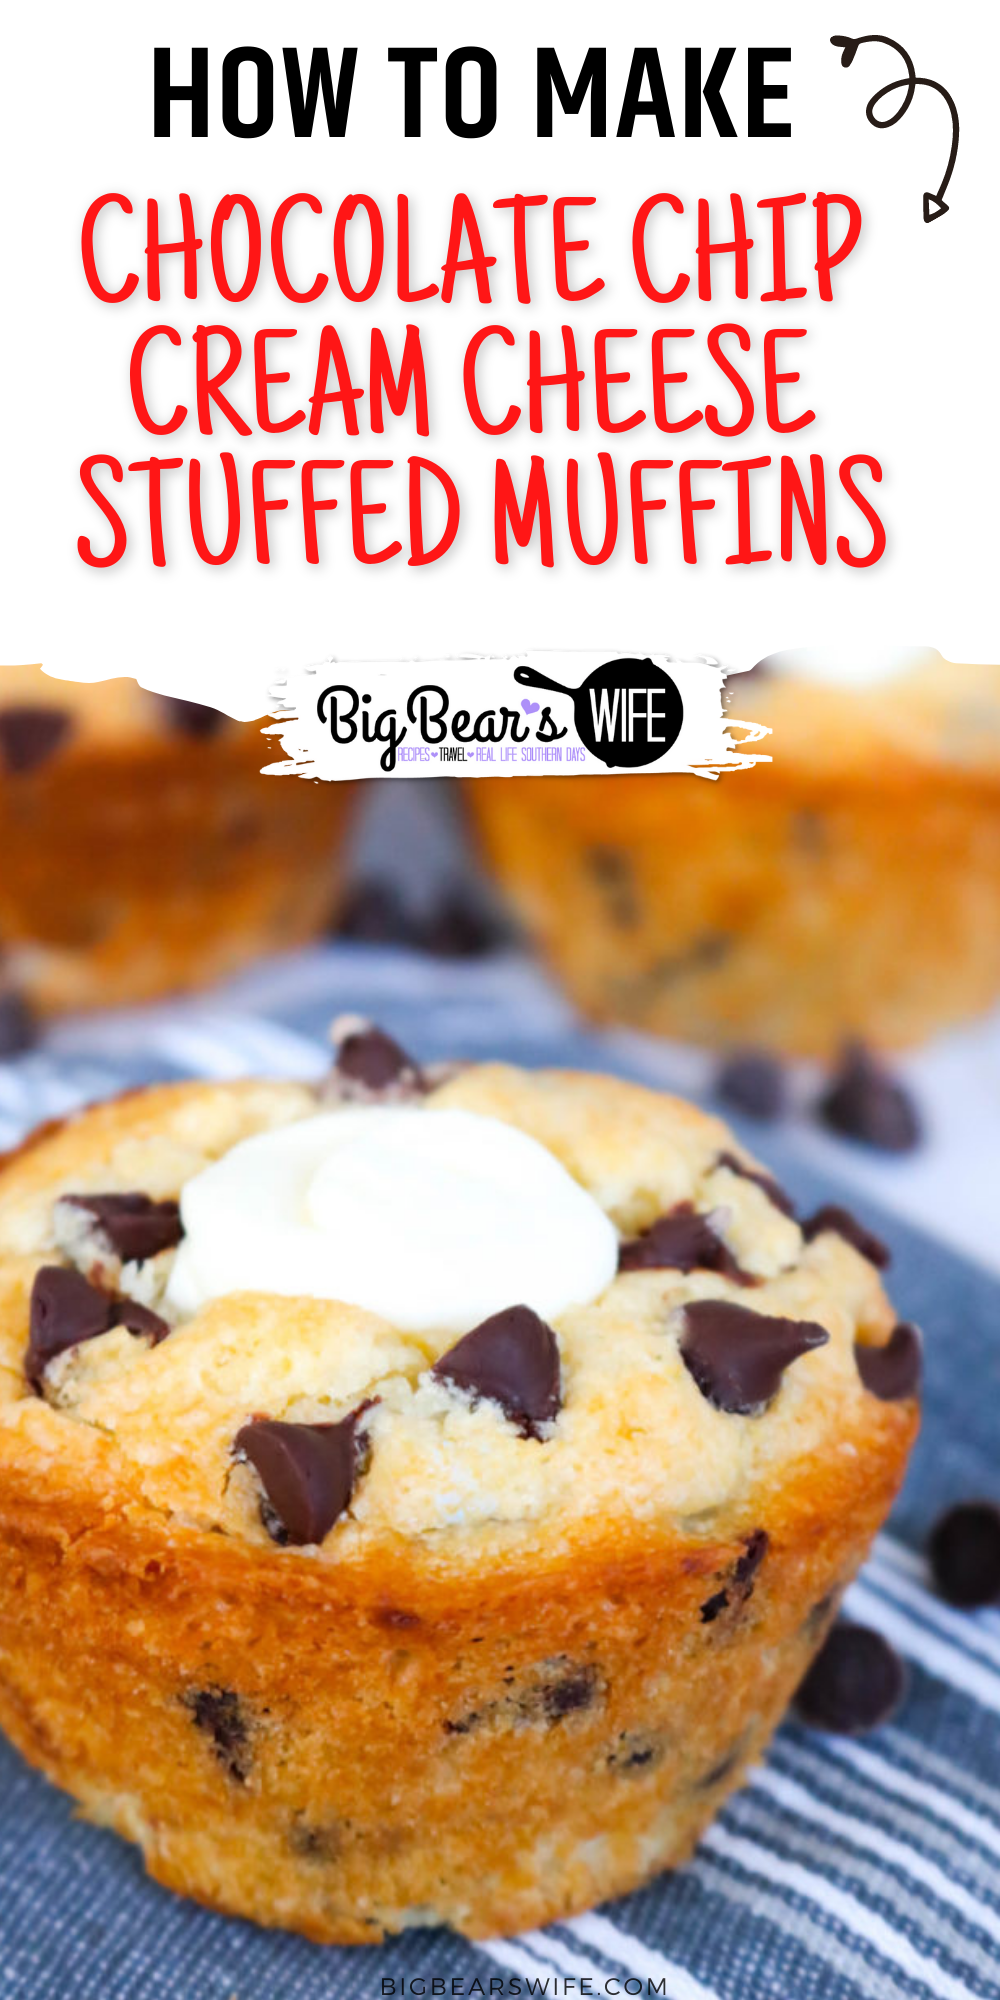 These Chocolate Chip Cream Cheese Stuffed Muffins are huge, fluffy, packed with chocolate chips and filled with a super easy cream cheese filling!  via @bigbearswife